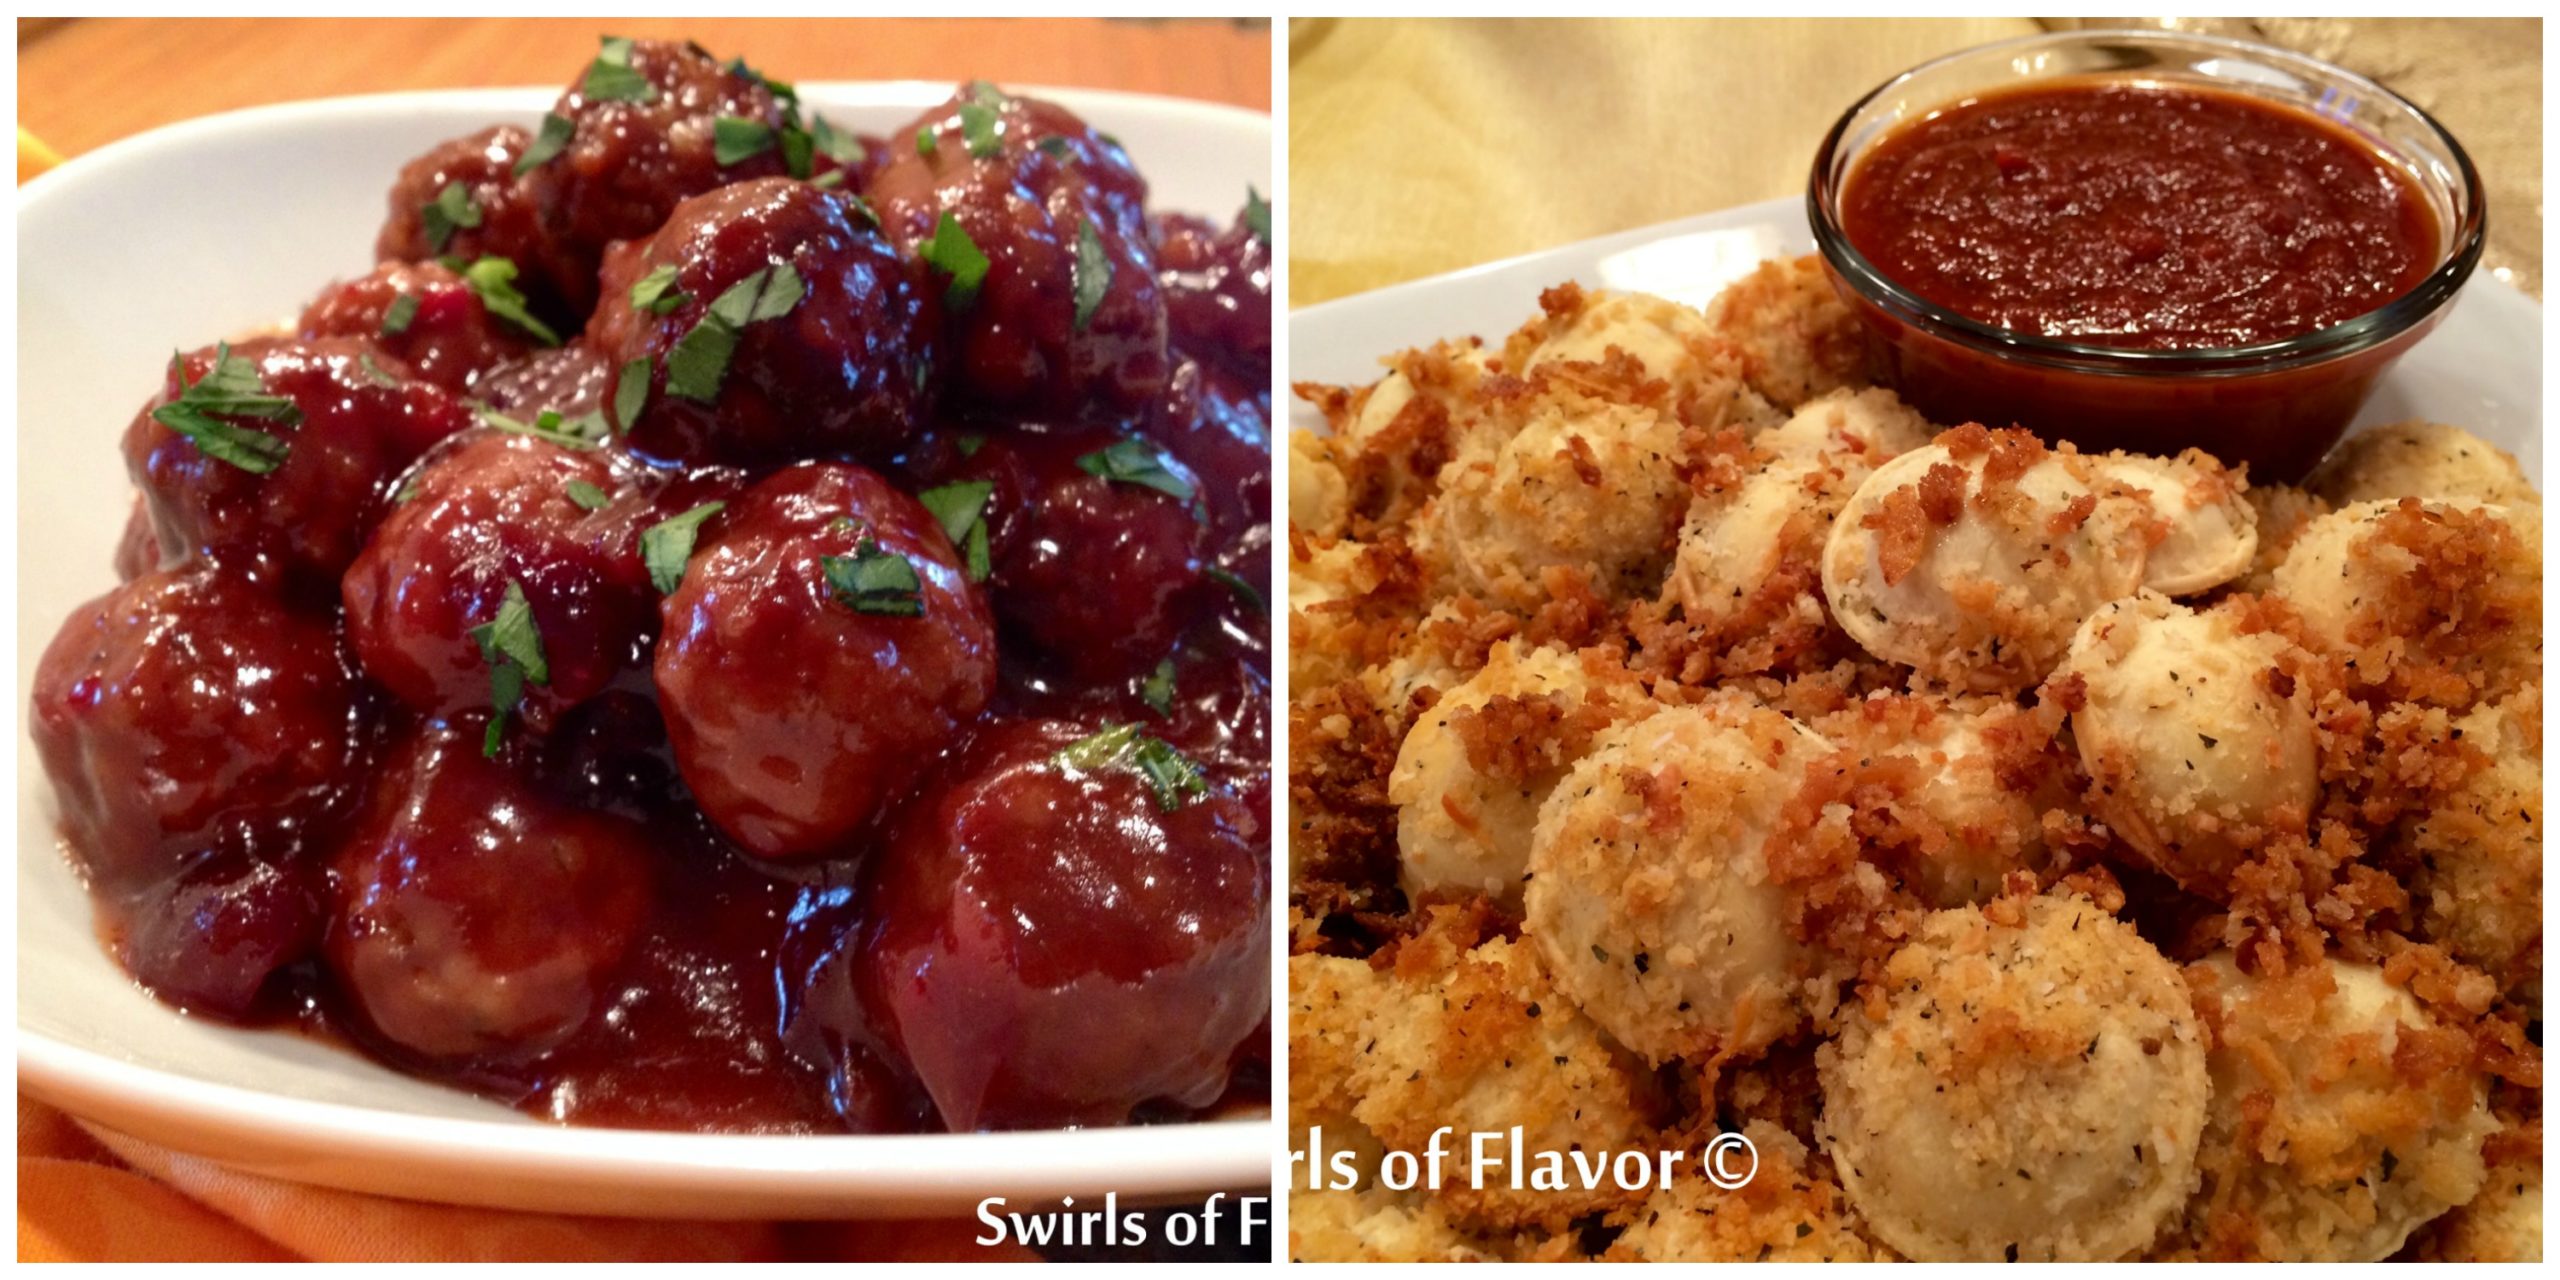 Cranberry meatballs and Baked Ravioli